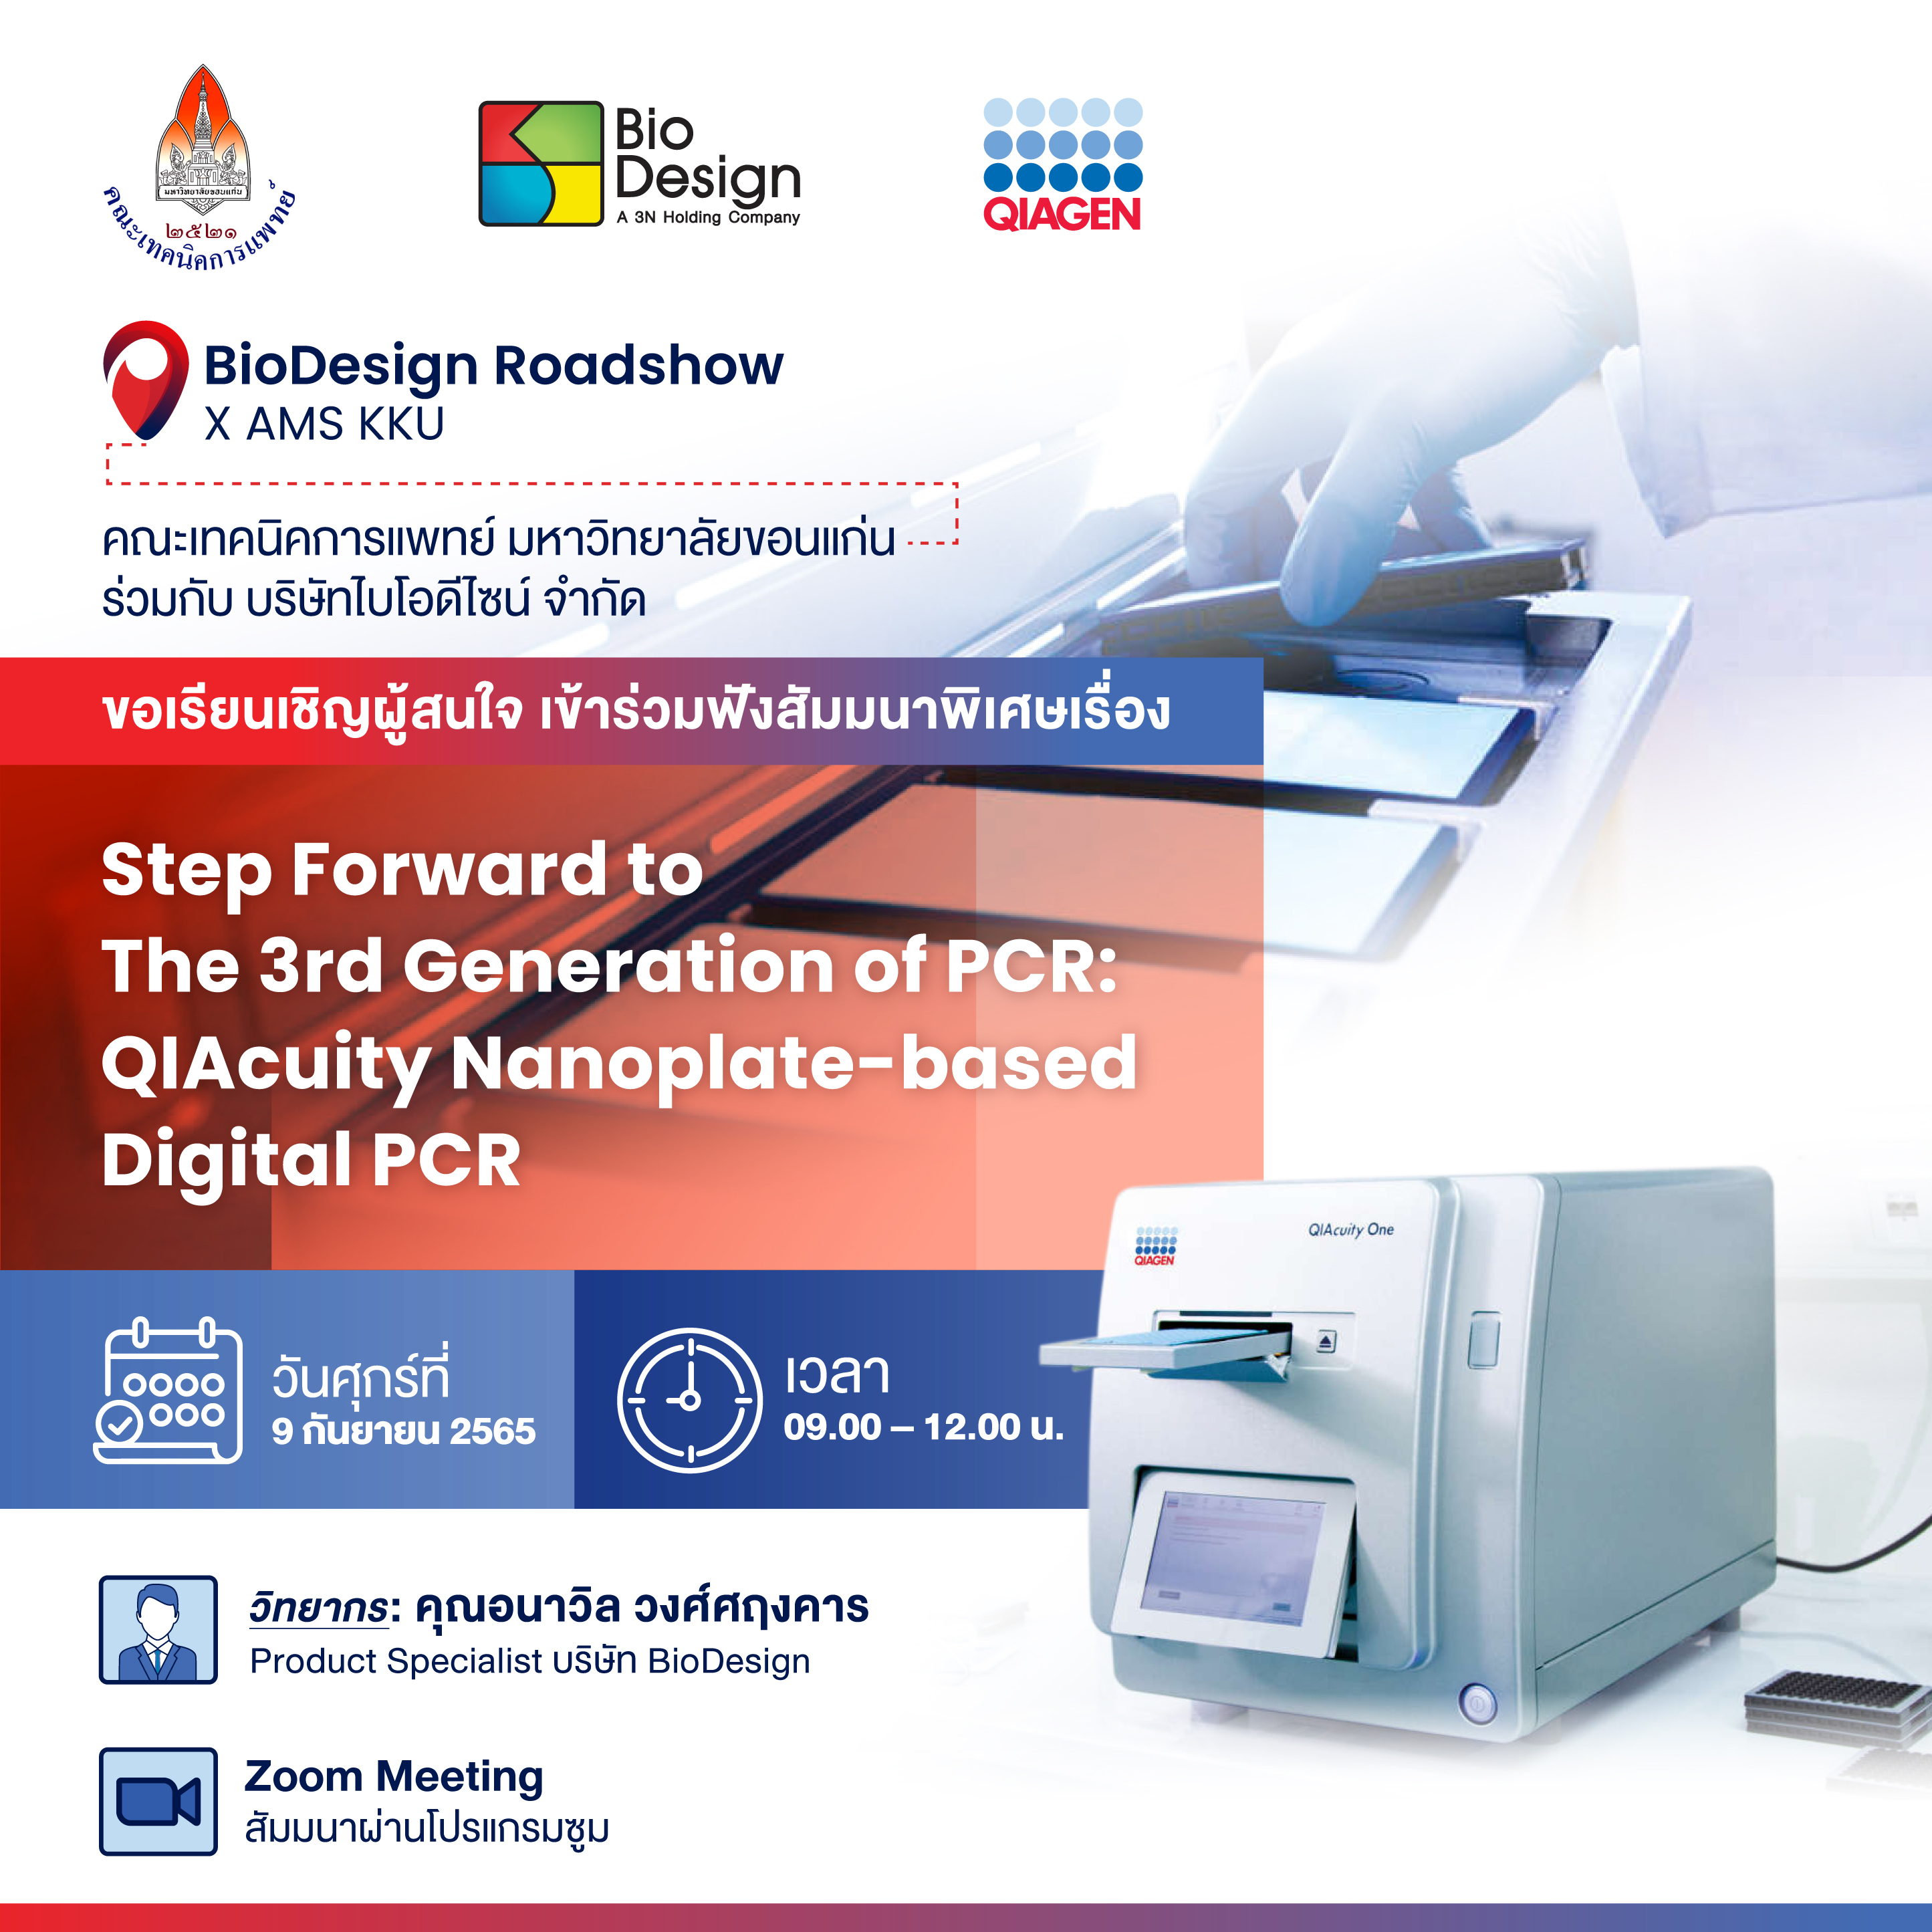 Step Forward to The 3rd Generation of PCR: QIAcuity Nanoplate-based Digital PCR